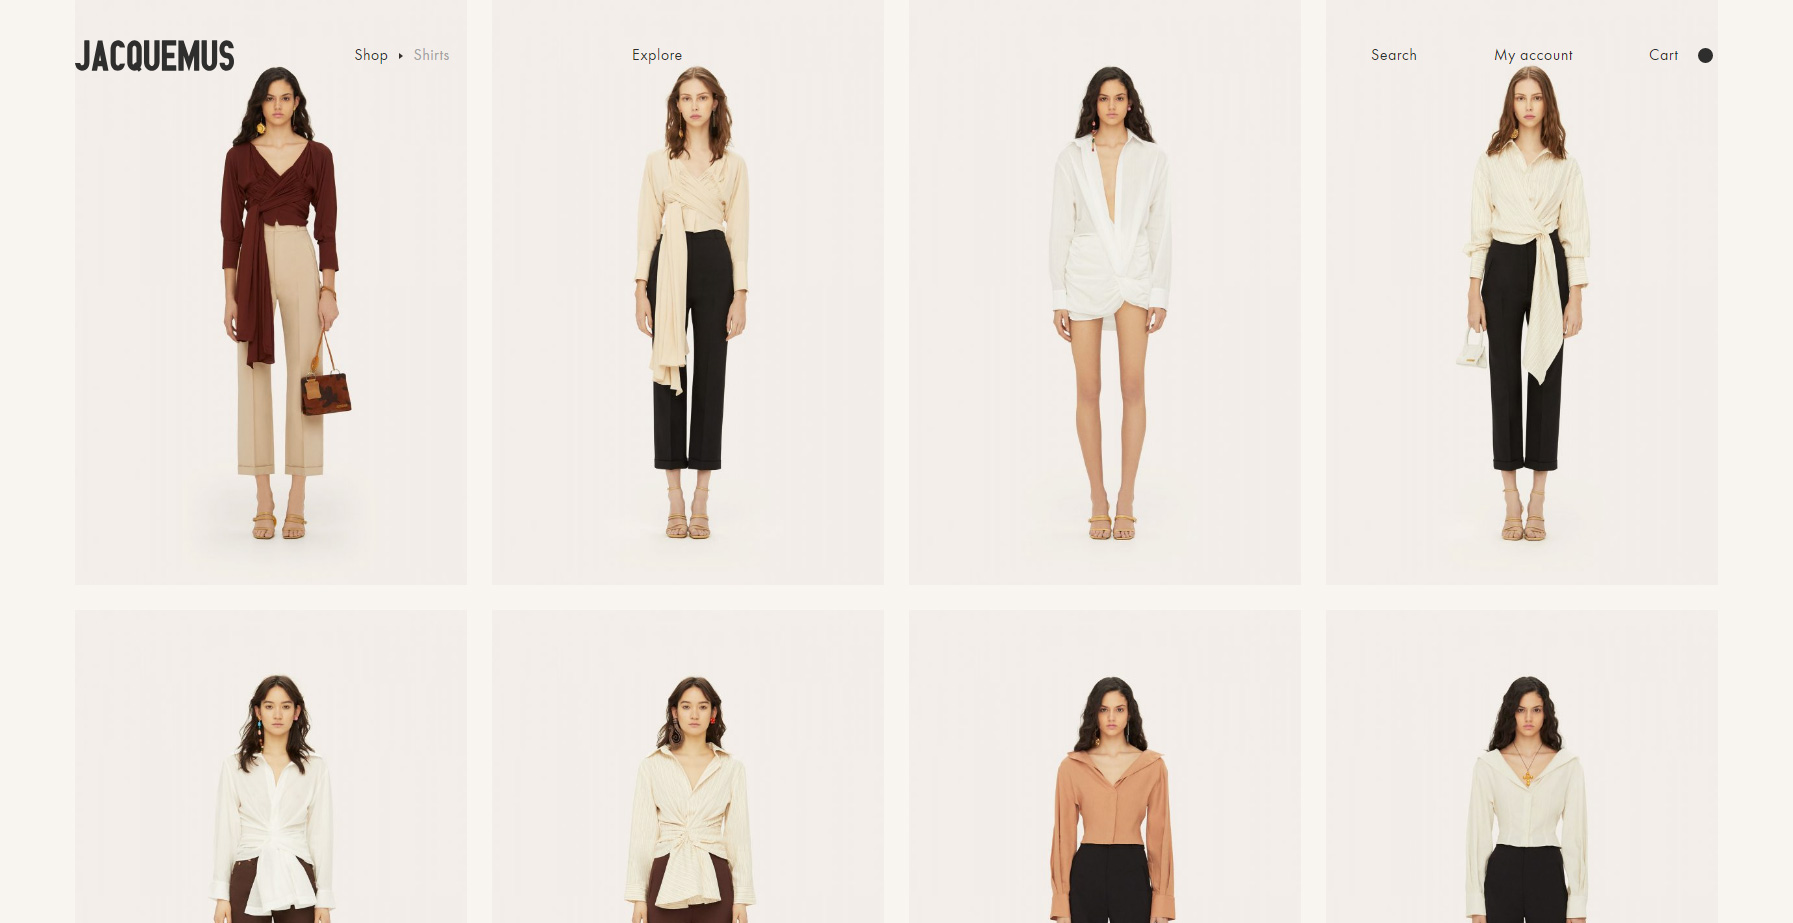 JACQUEMUS - Website of the Day